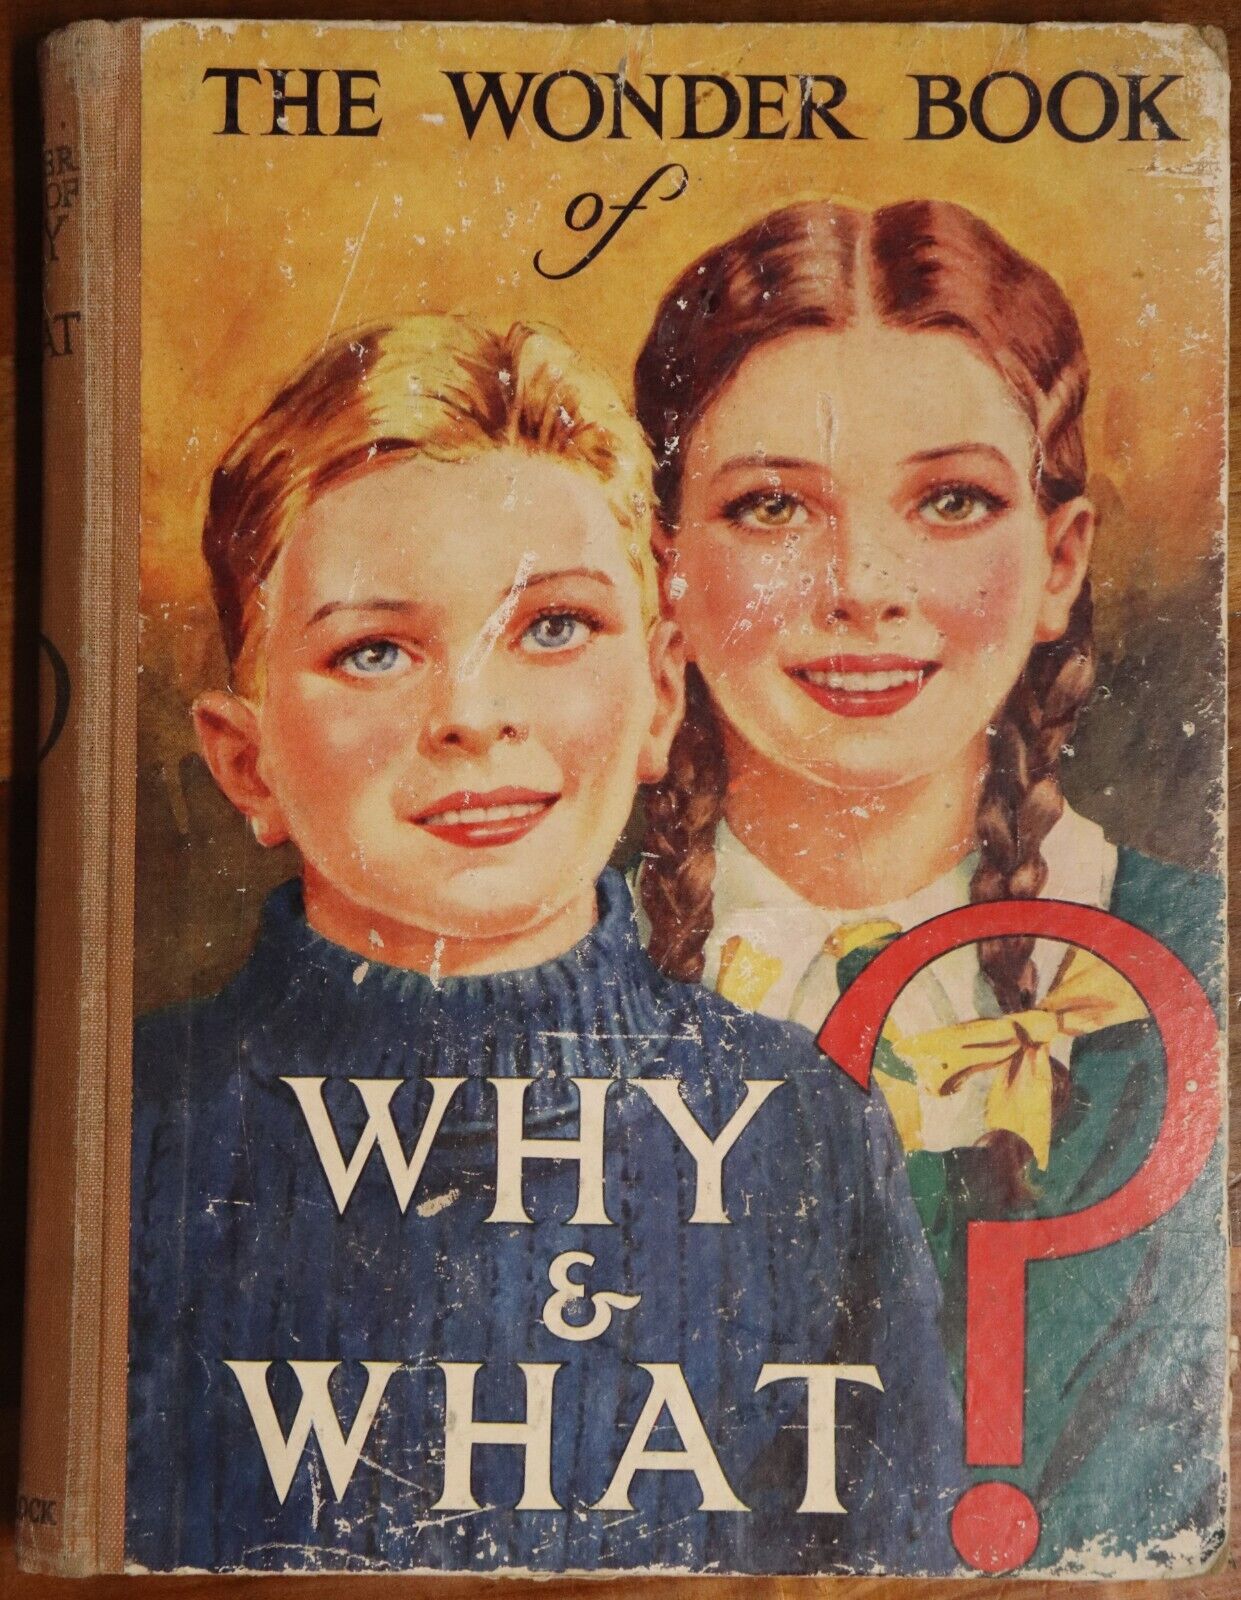 The Wonder Book Of Why & What - c1949 - Antique Childrens Book